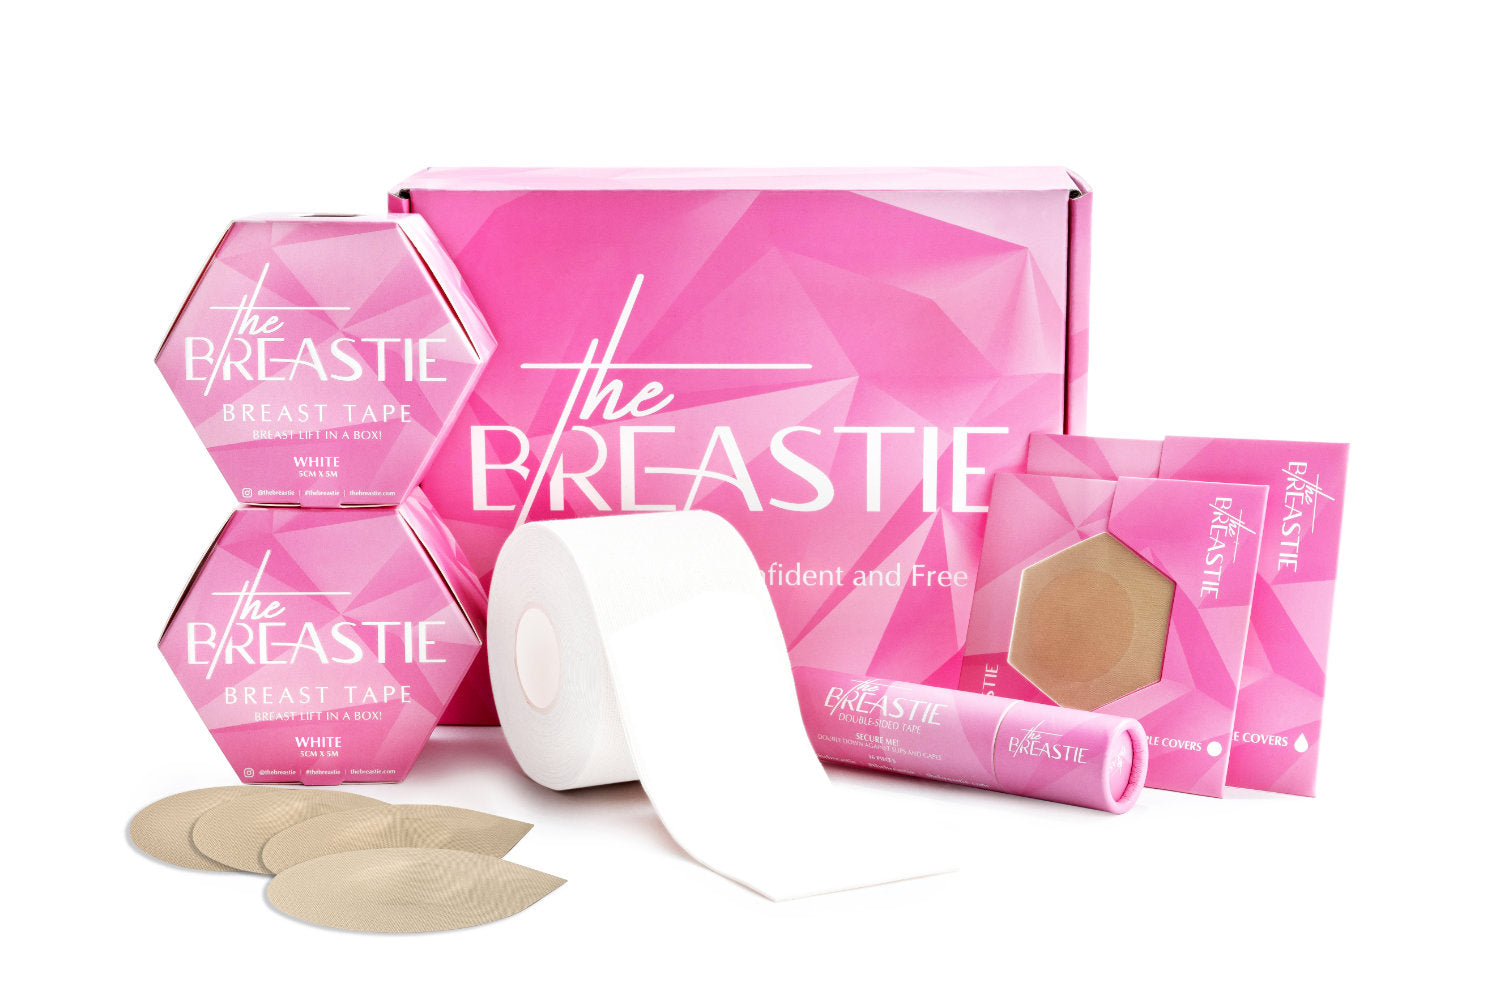 The Breastie Bundle (White) - Feel Beautiful, Confident and Free!